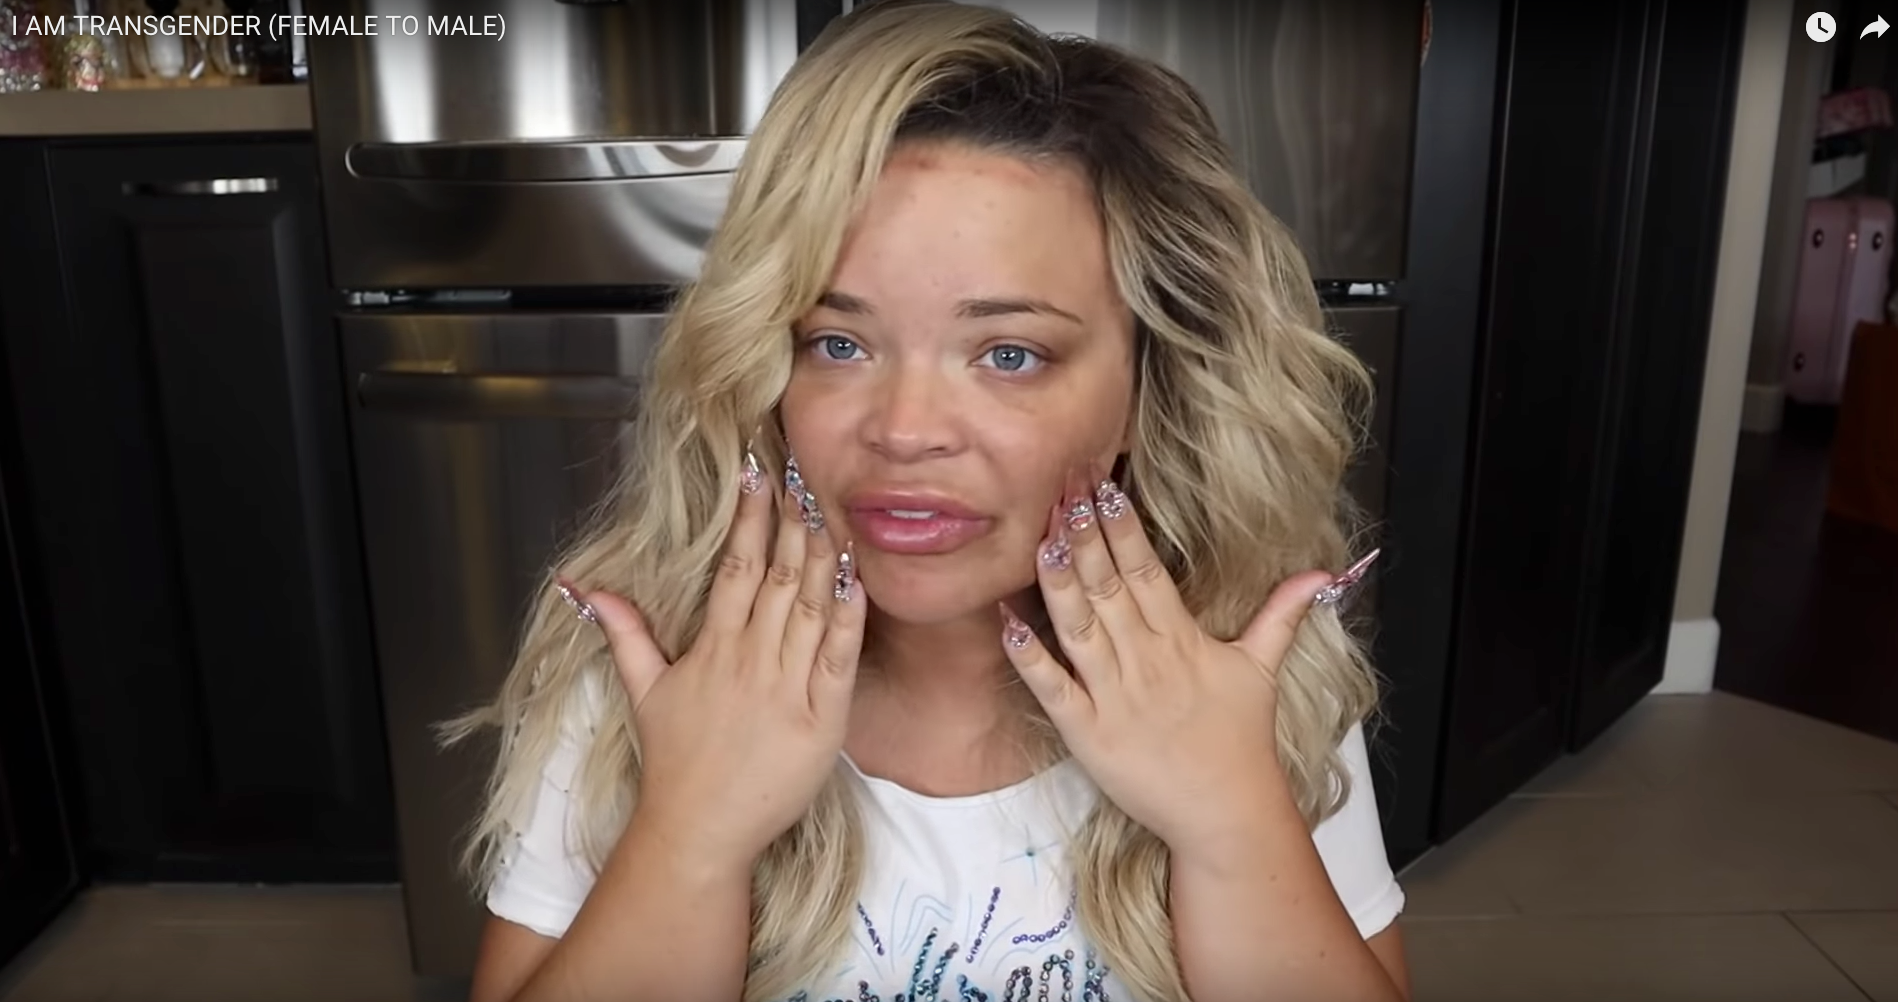 pinknews.co.uk - American media personality and YouTuber Trisha Paytas made $8